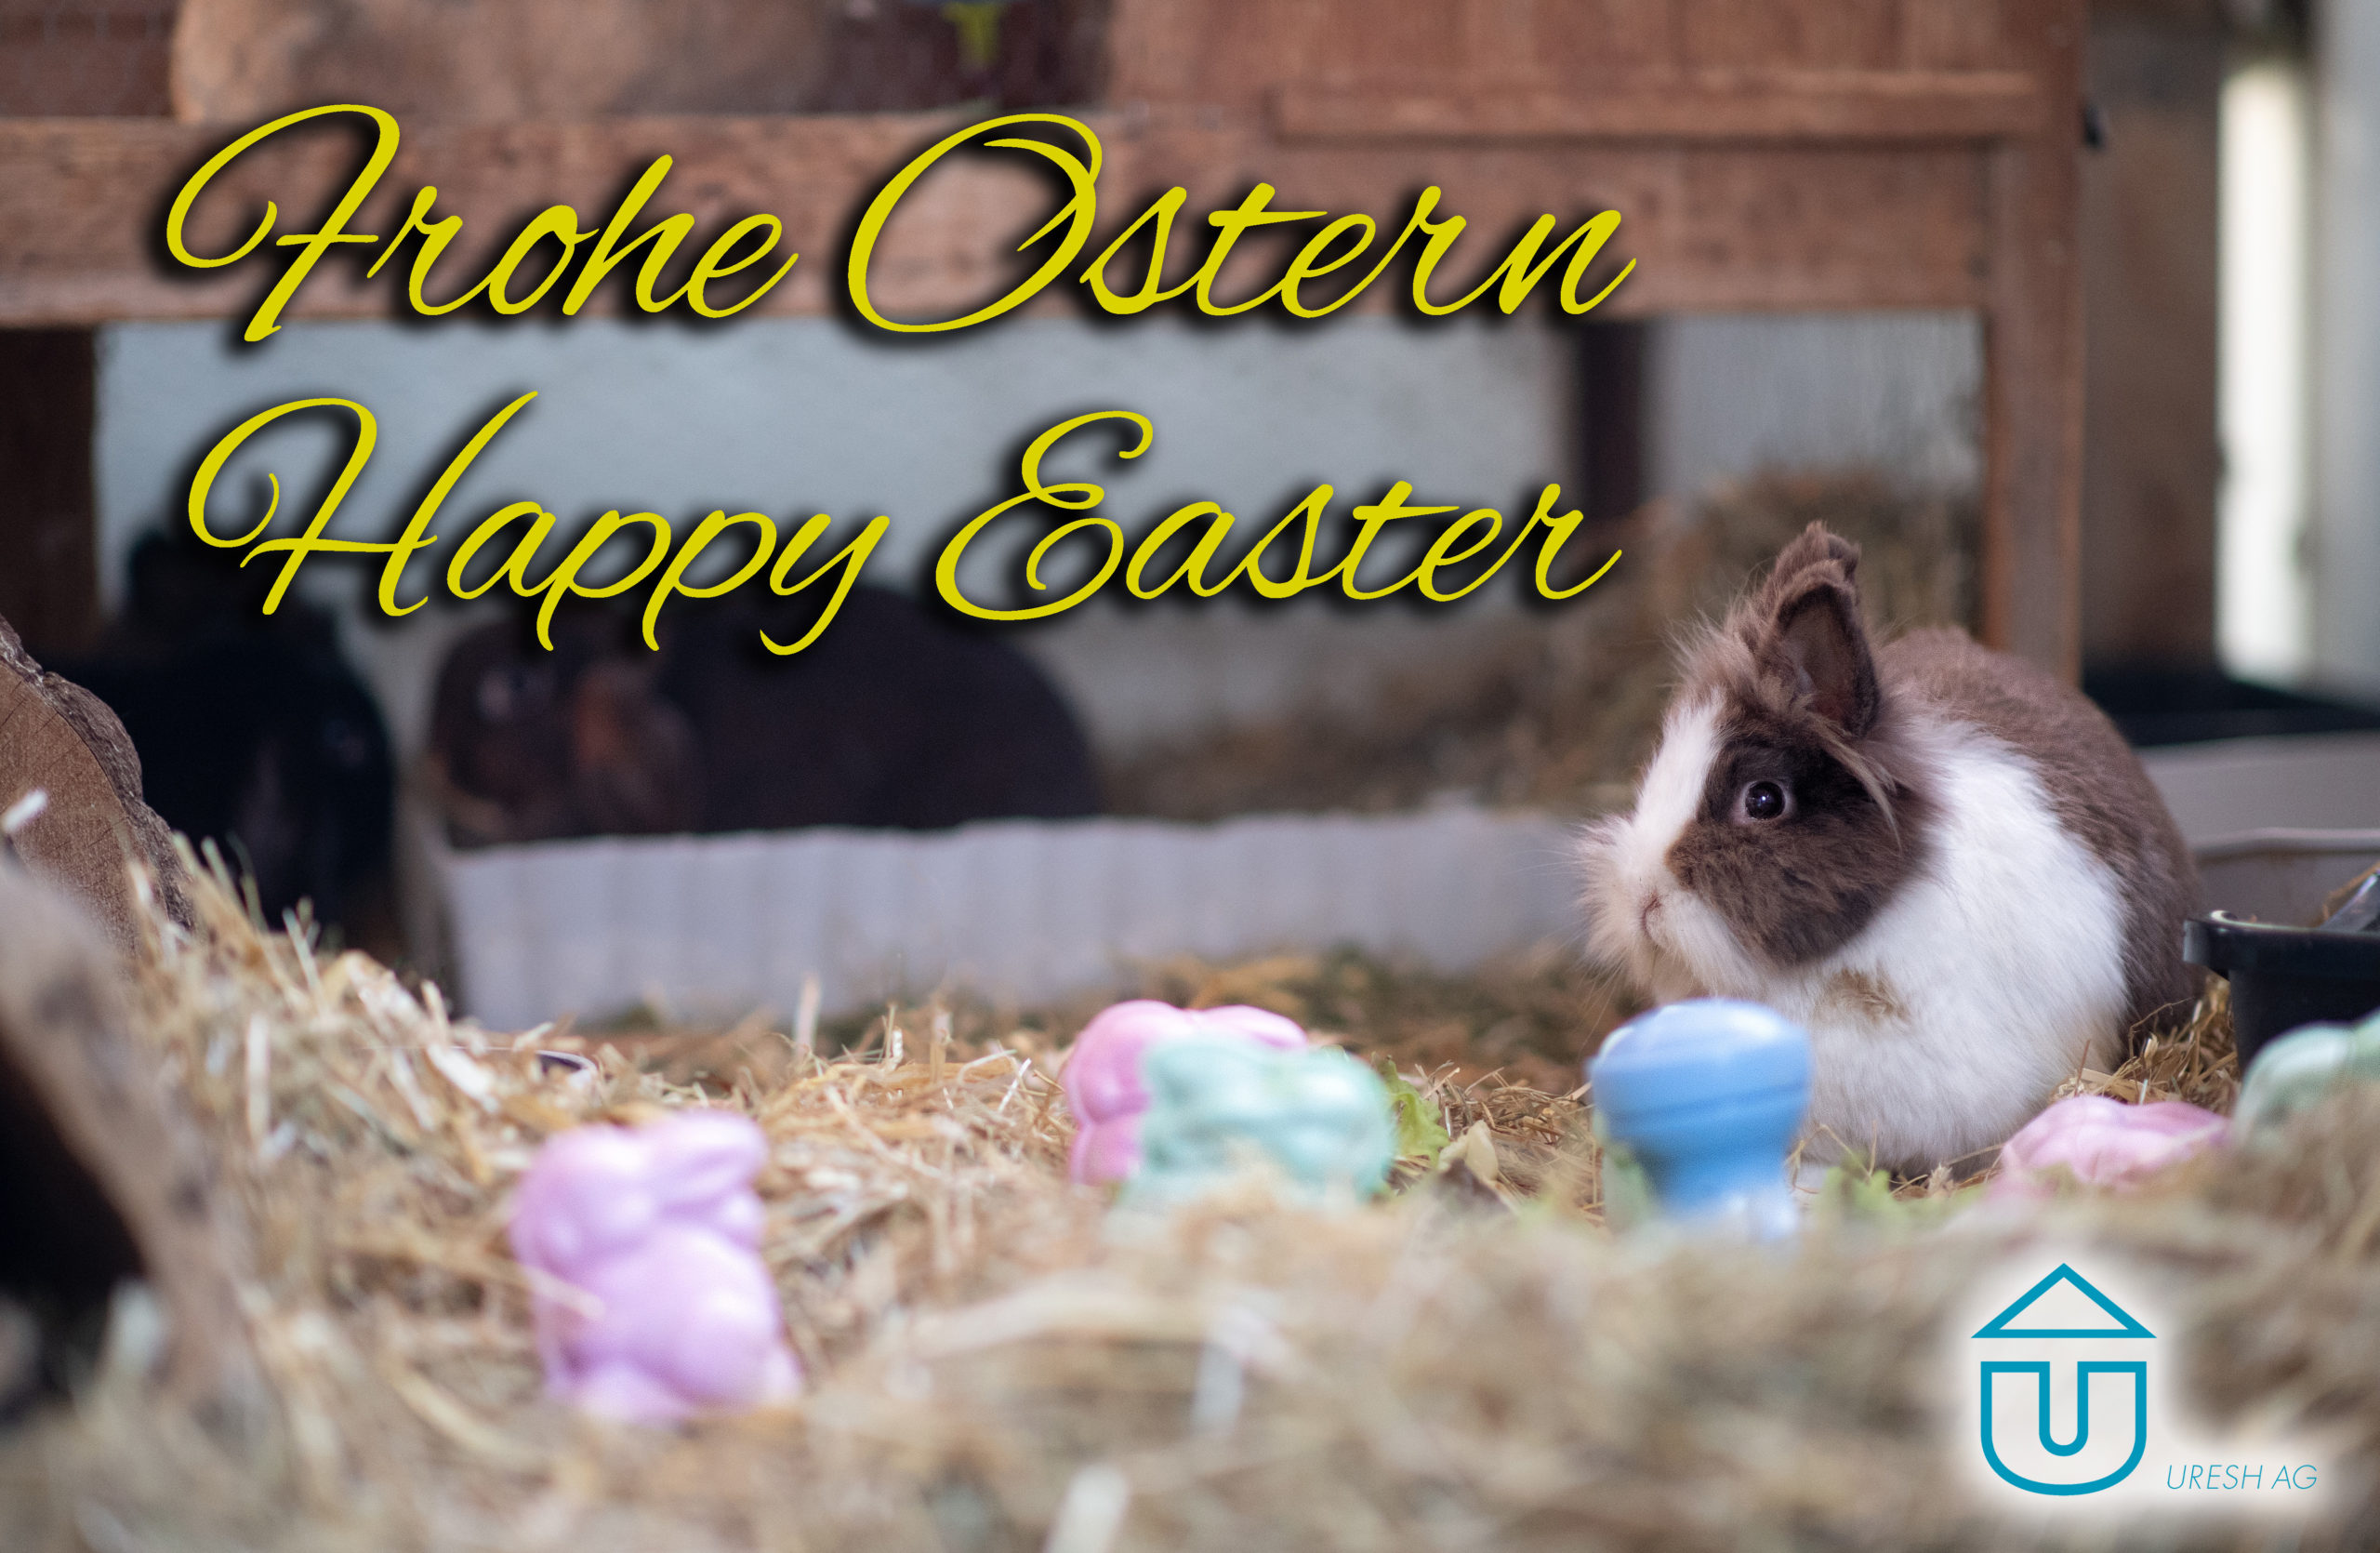 Featured image for “Happy Easter”